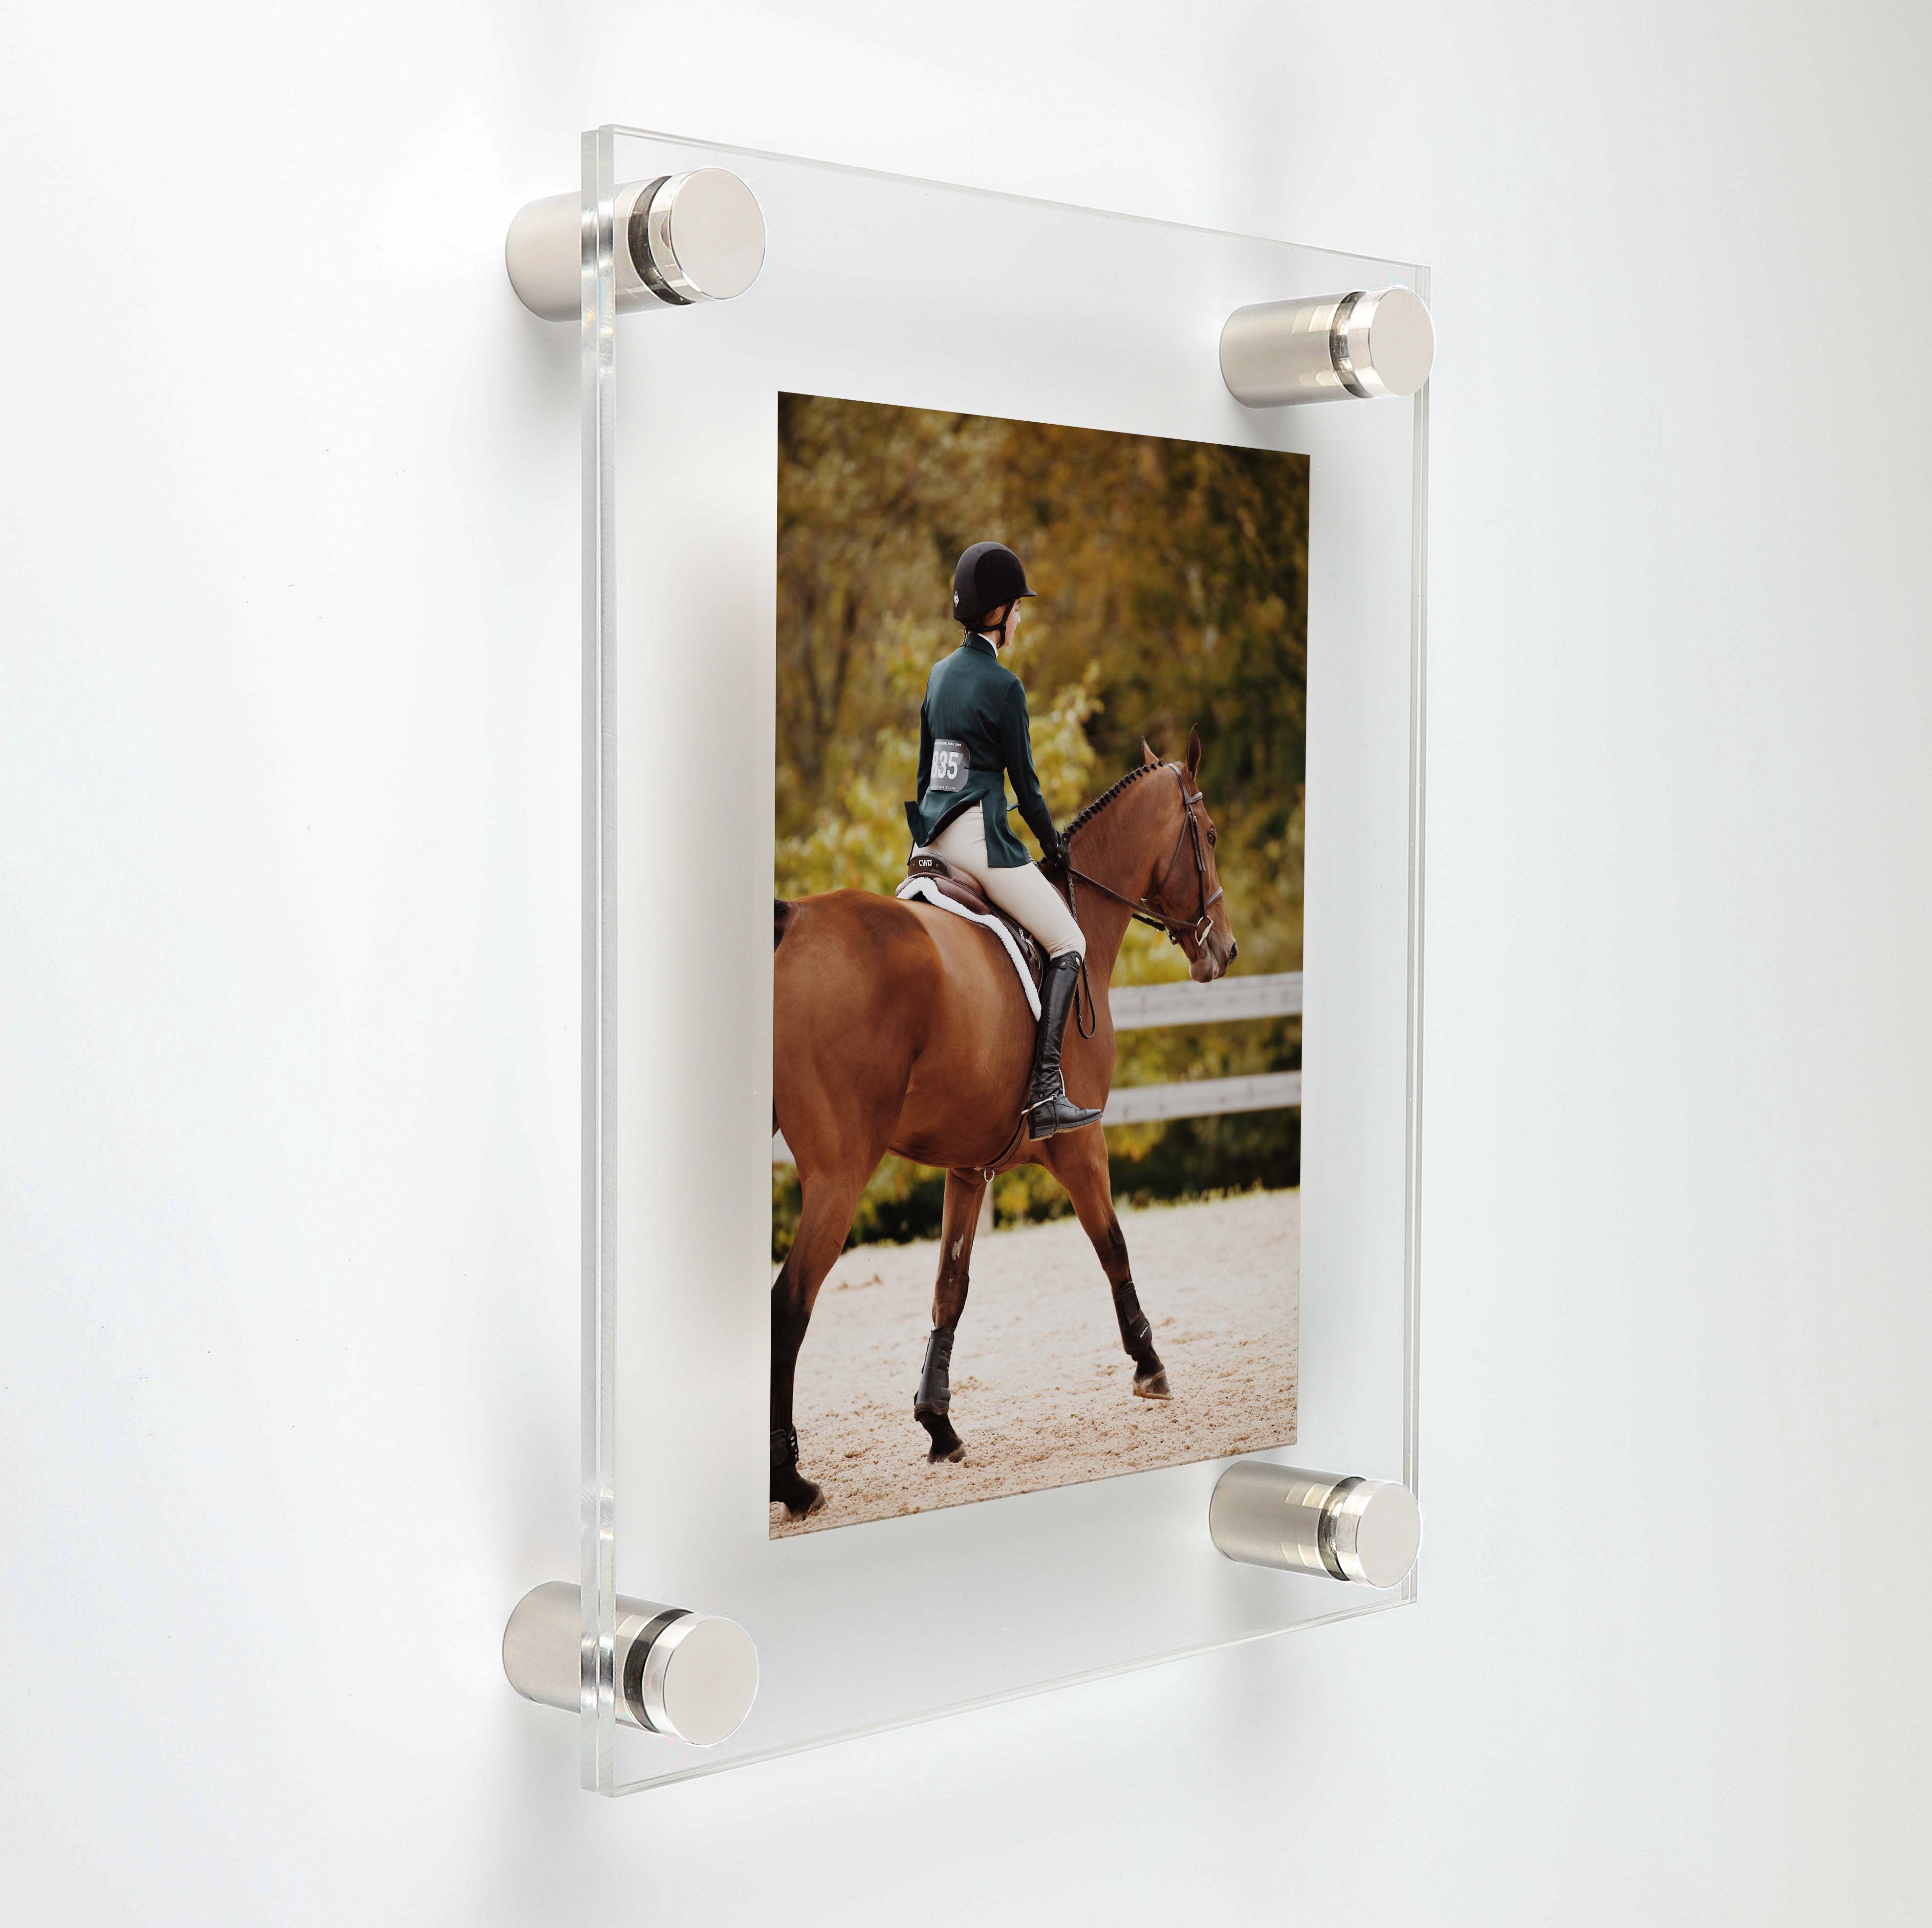 (2) 27'' x 39'' Clear Acrylics , Pre-Drilled With Polished Edges (Thick 3/16'' each), Wall Frame with (6) 3/4'' x 3/4'' Polished Stainless Steel Standoffs includes Screws and Anchors